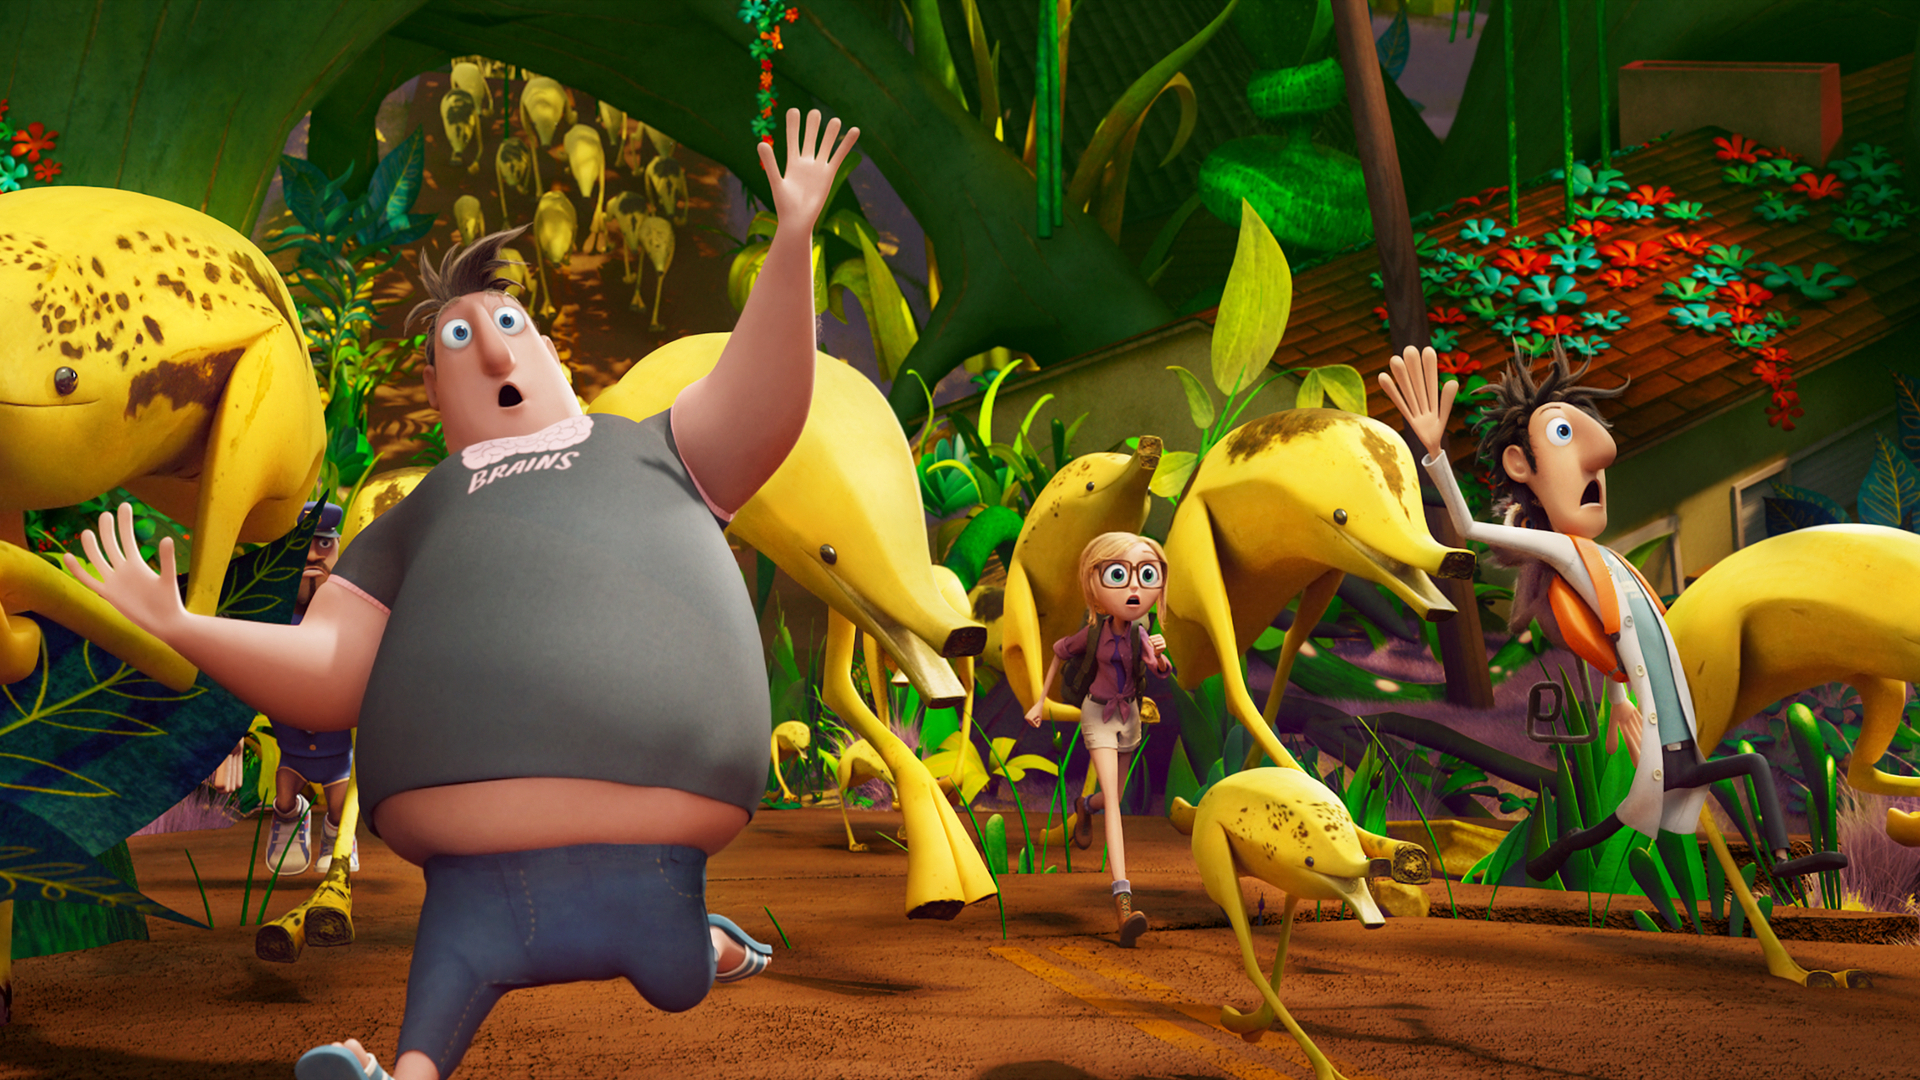 Brent Mchale Cloudy With A Chance Of Meatballs 2 Flint Lockwood Movie Sam Sparks 1920x1080